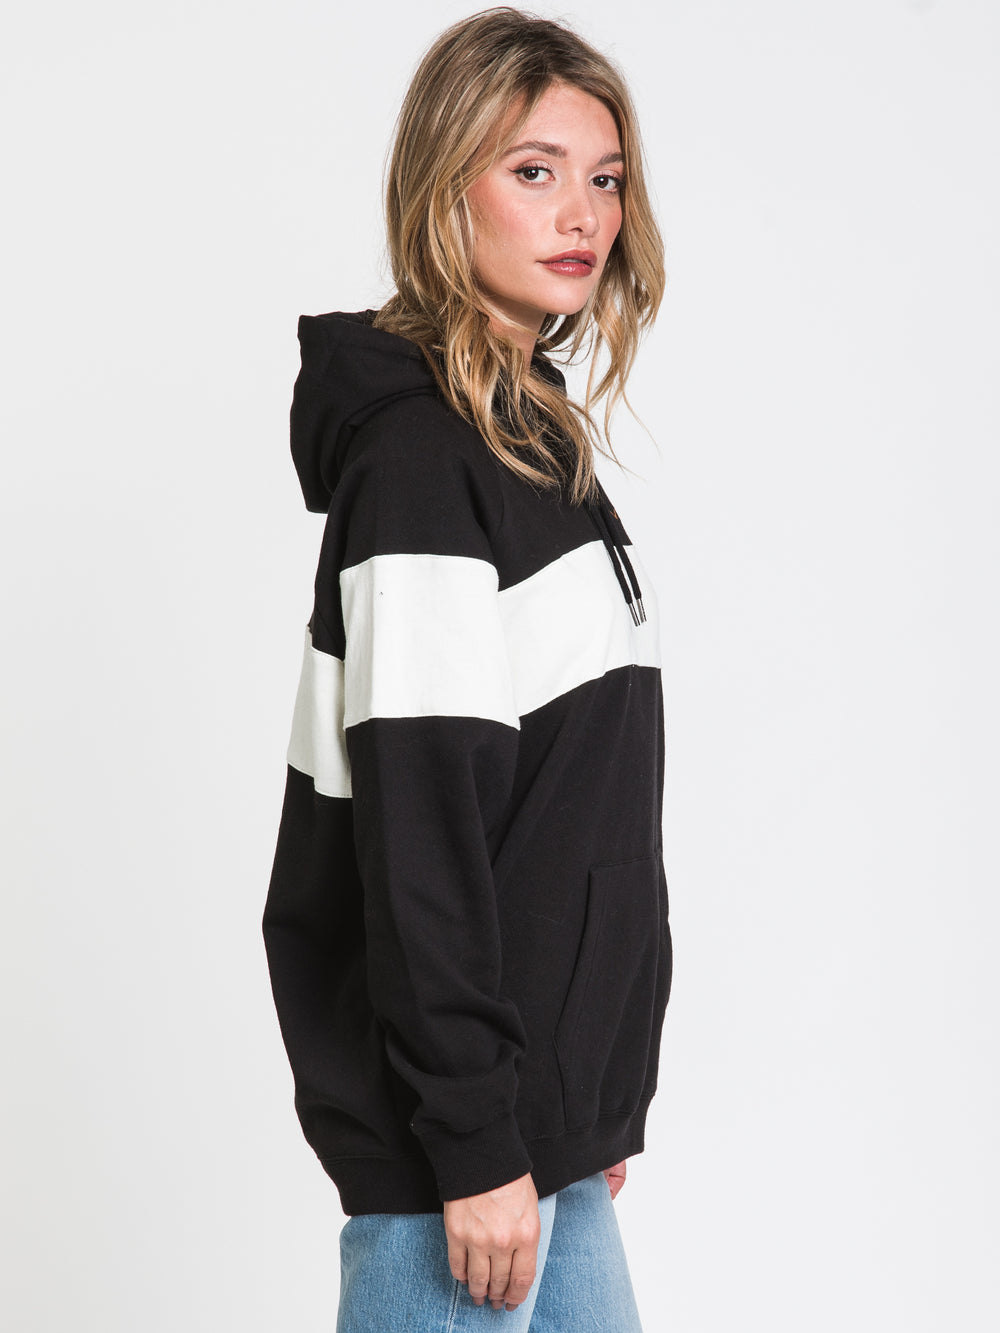 VOLCOM MADLY YOURS PULLOVER HOODIE - DESTOCKAGE